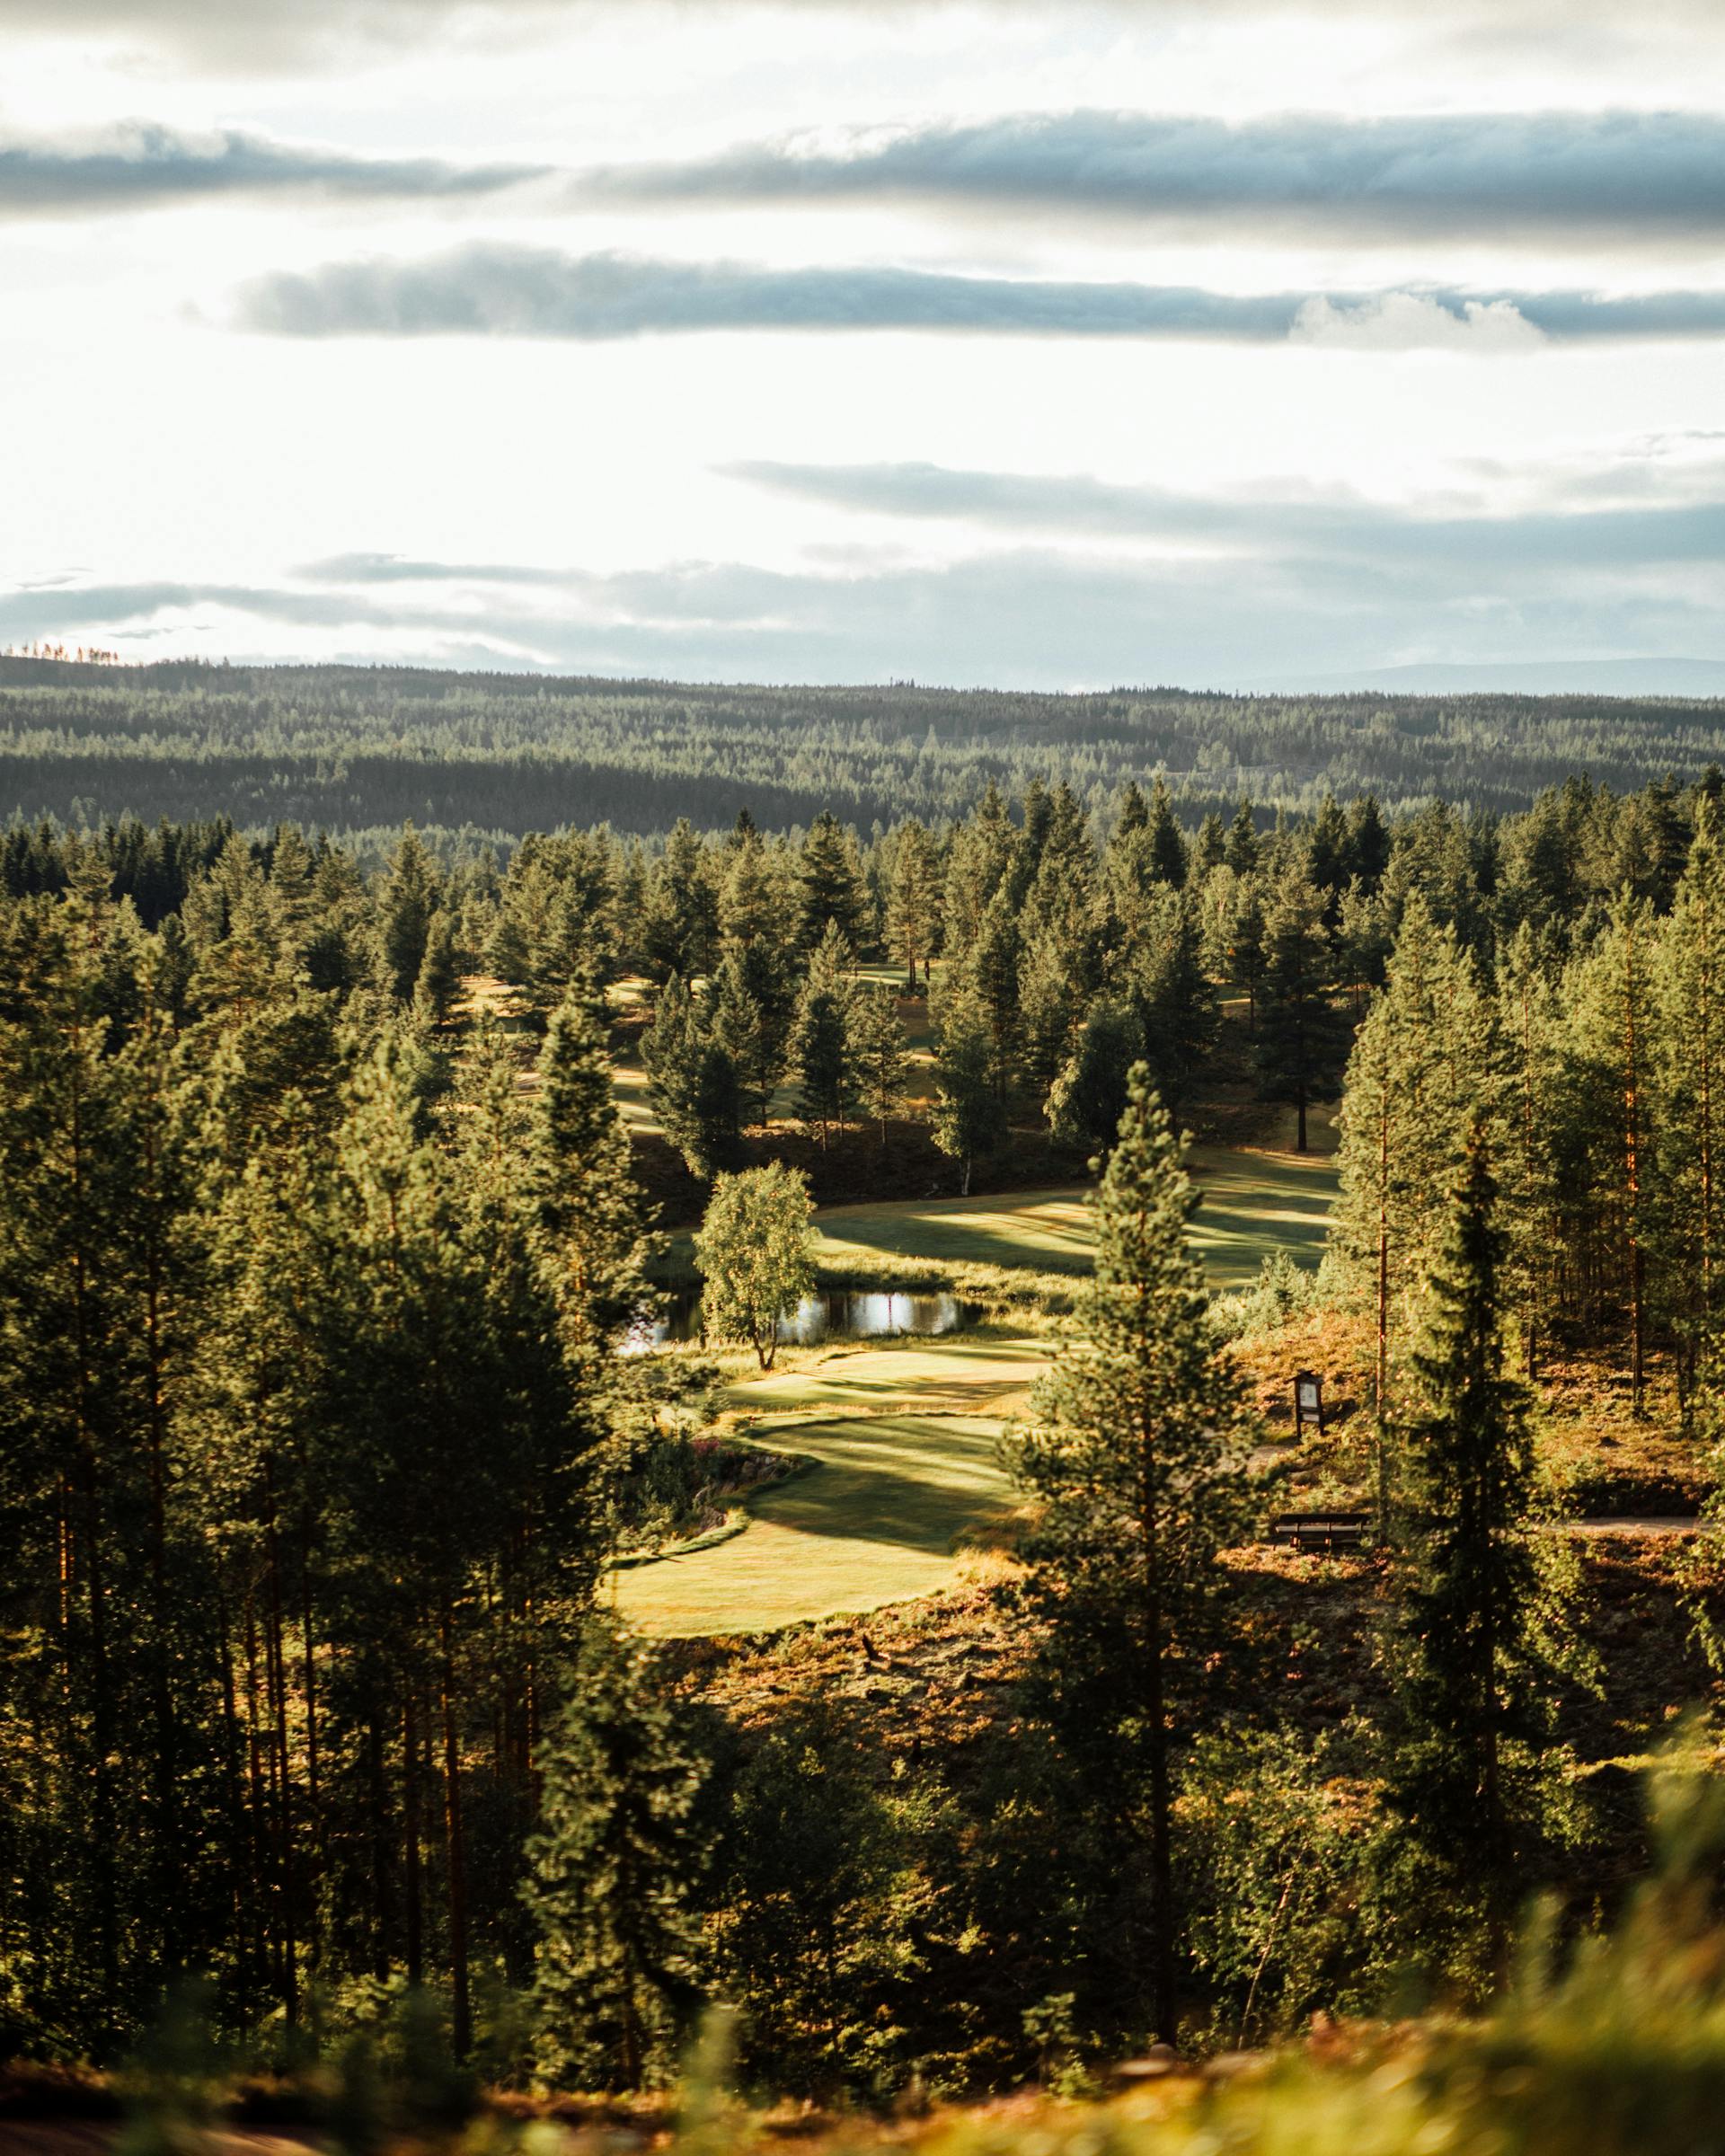 Located in between the mountains of Idre, the course at Idrefjällens Golfklubb brings both vast expanses and fresh mountain air to the game. Source: Idrefjällens Golfklubb. 